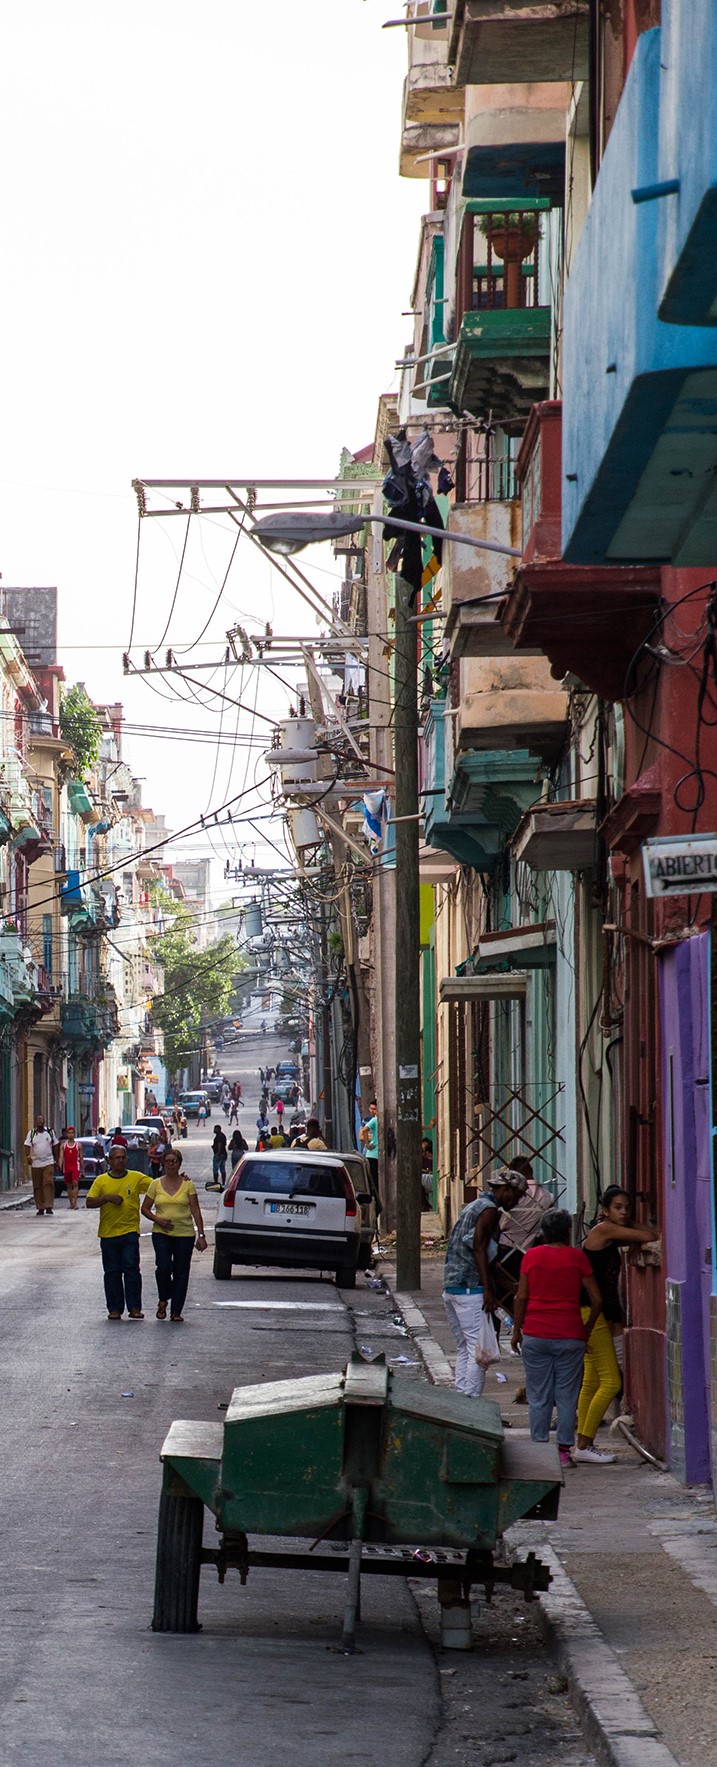 The bustling and colorful streets of Havana, Cuba.